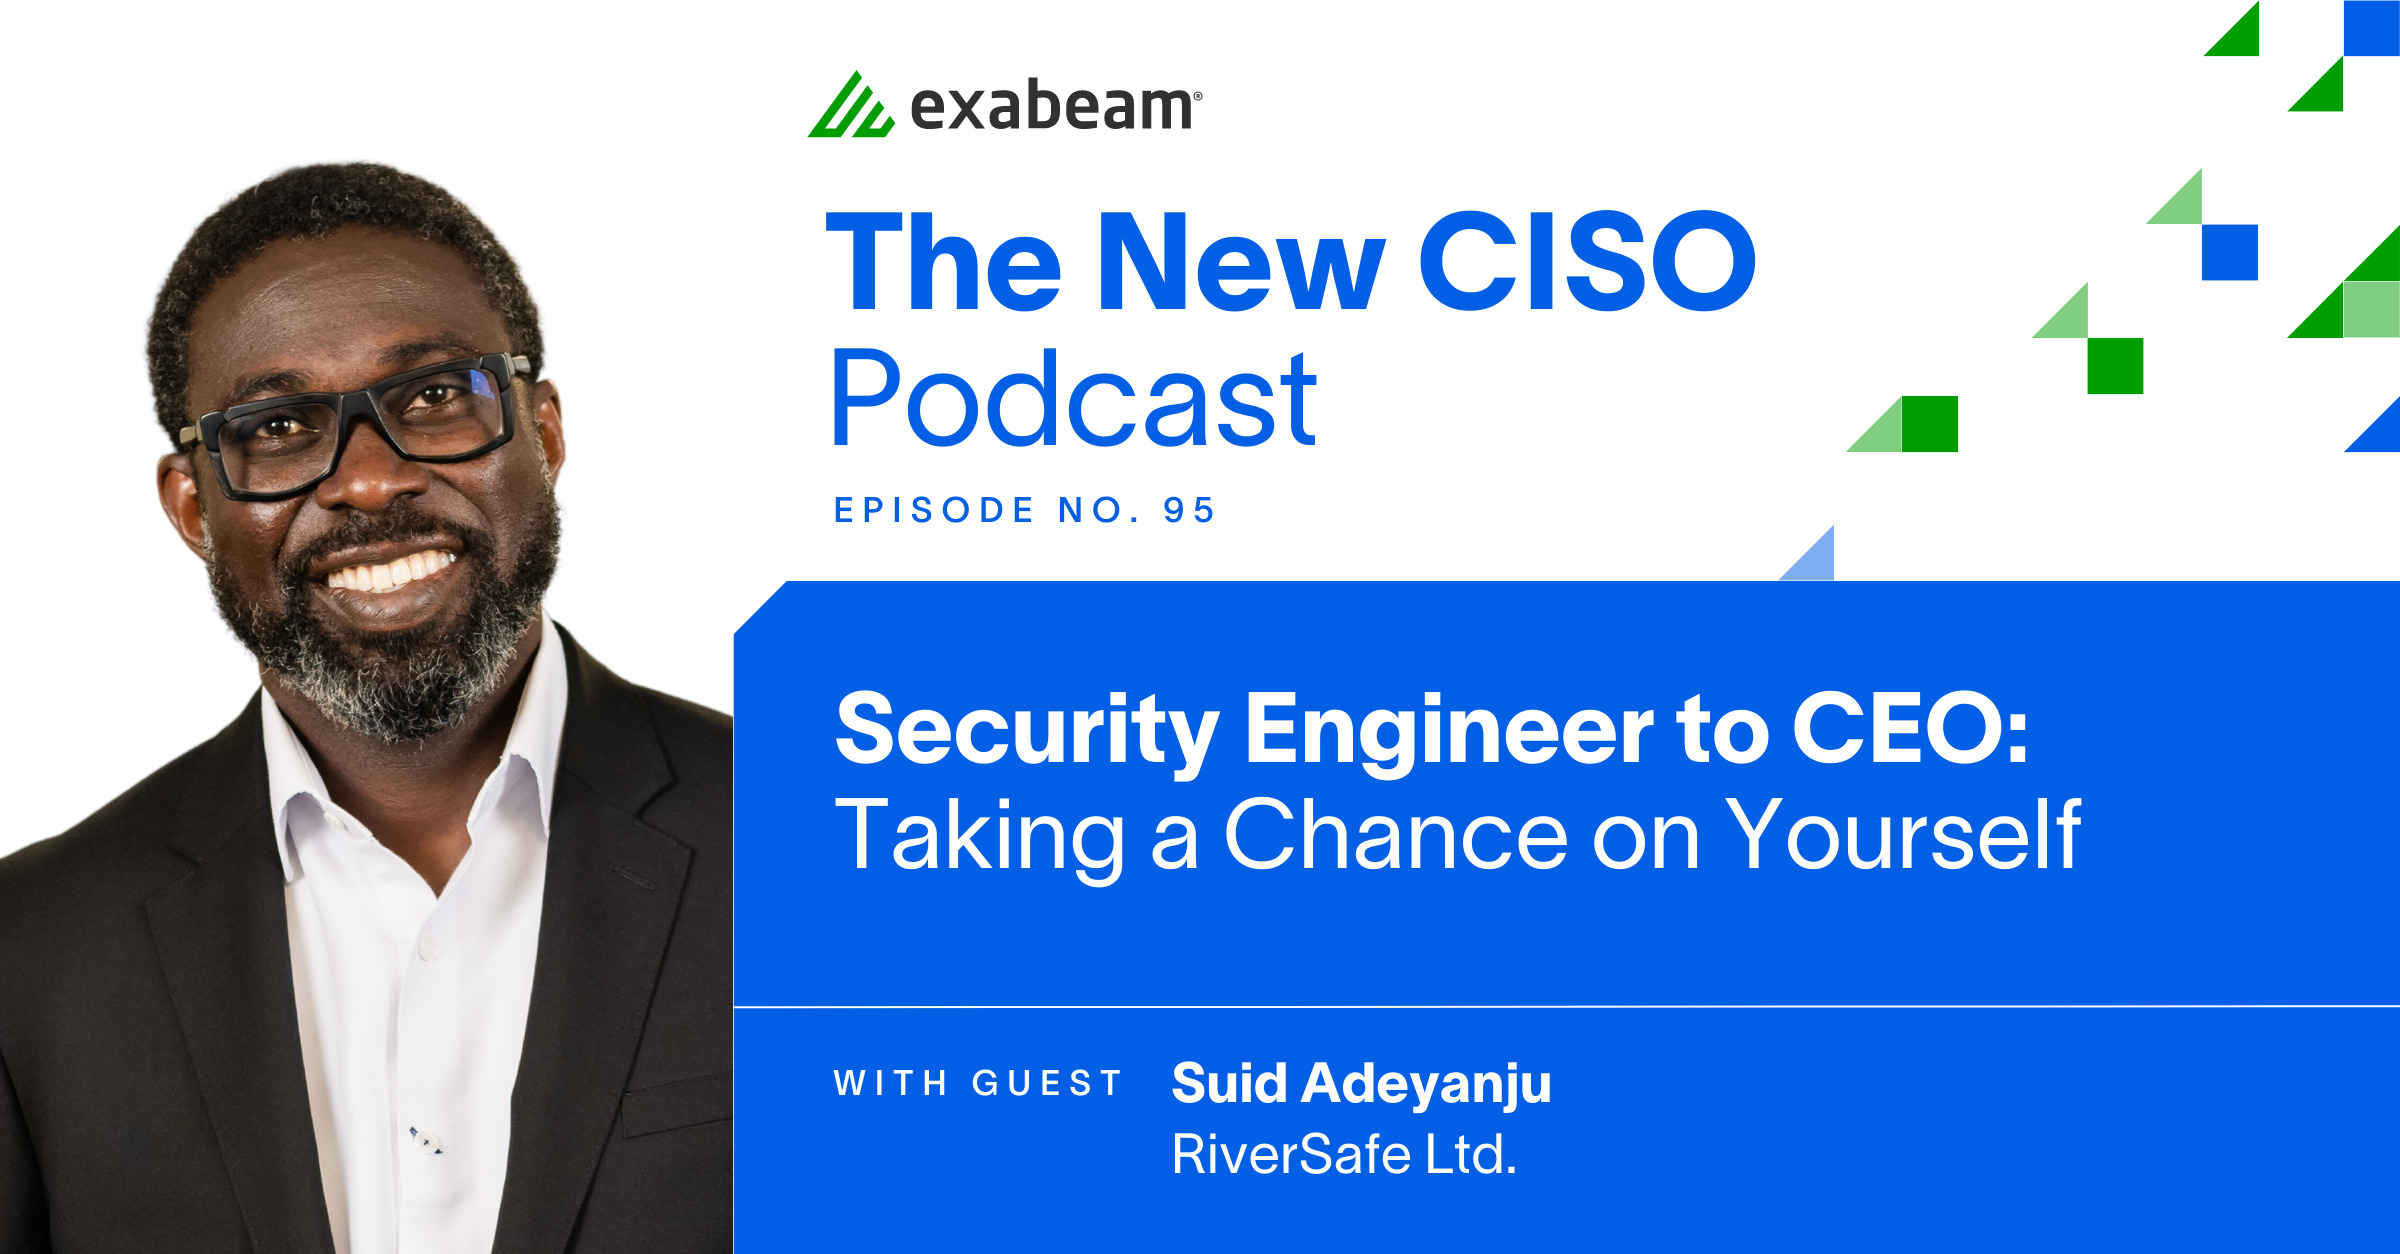 Podcast - The New CISO Podcast Episode 95: Security Engineer to CEO - Taking a Chance on Yourself